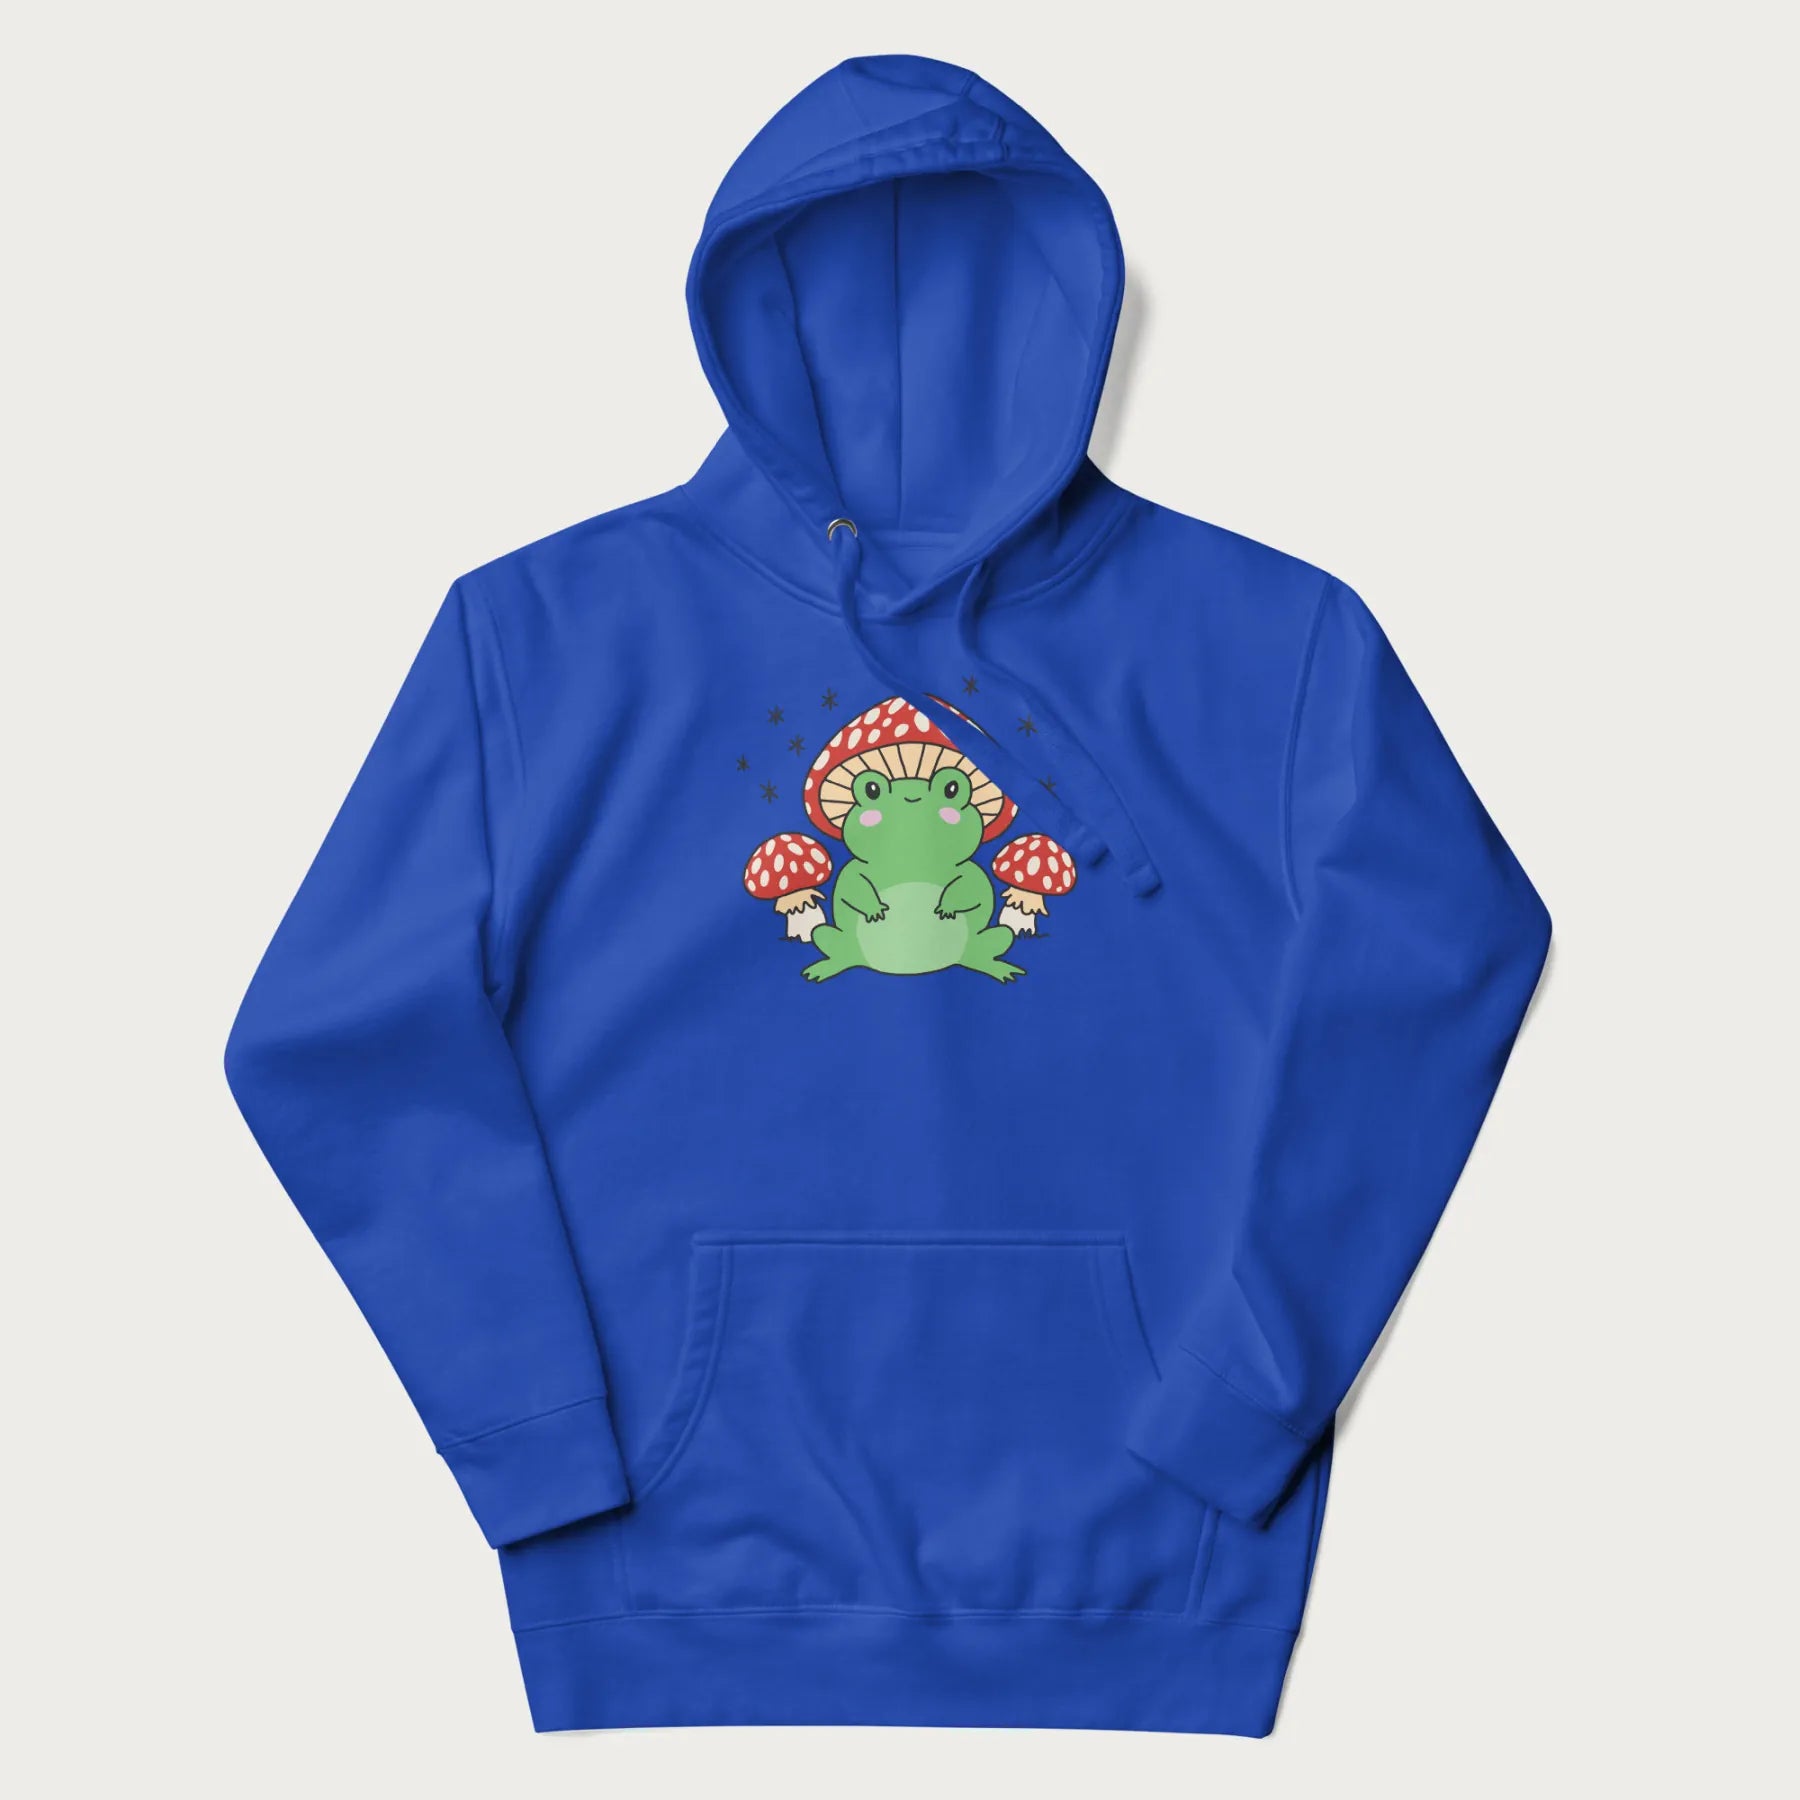 Royal blue hoodie will illustration of a cute green frog with red and white mushrooms.